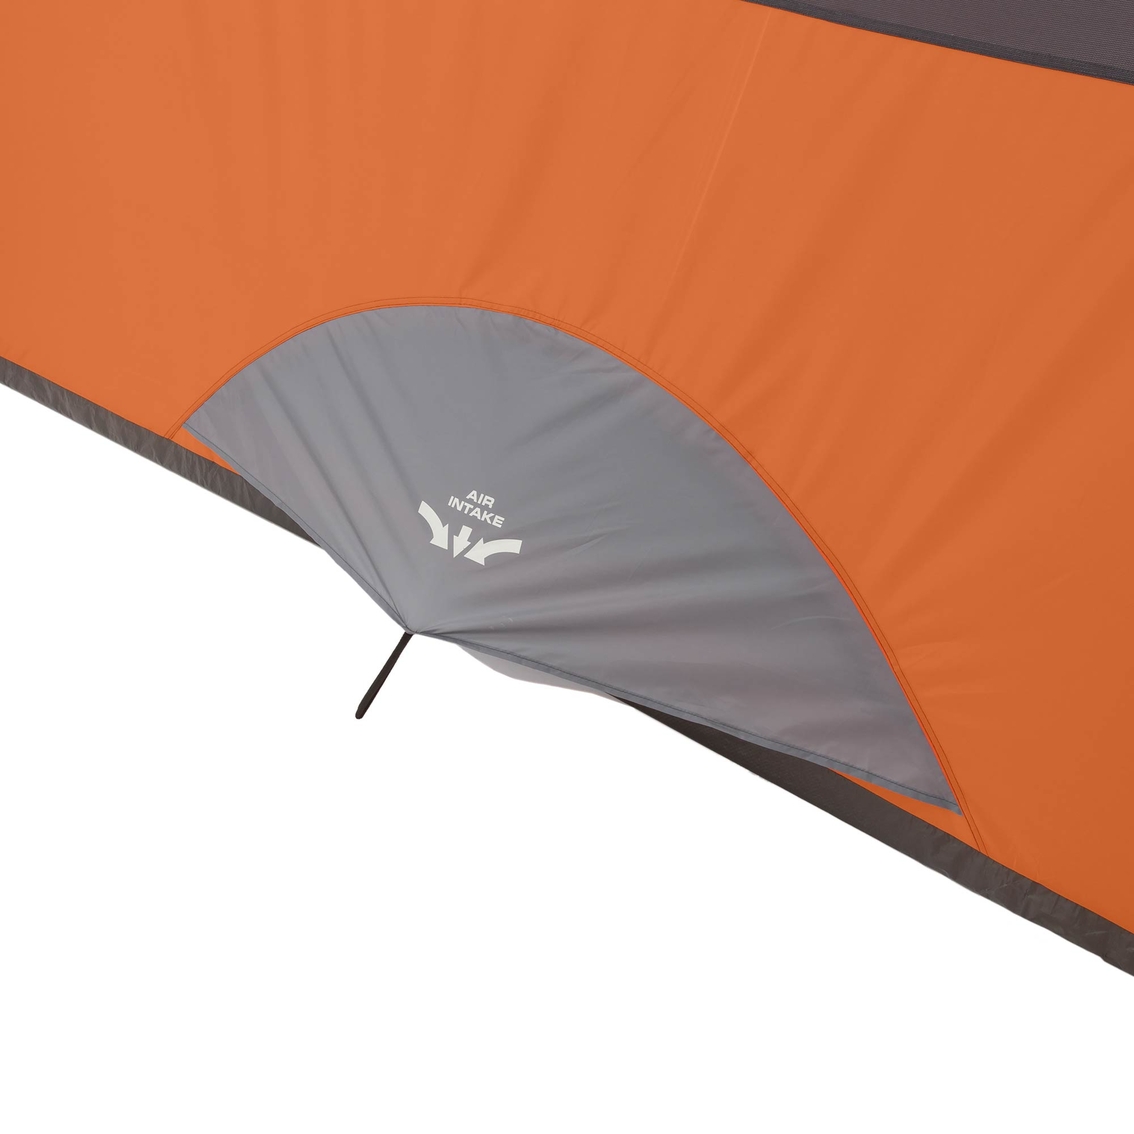 Core Equipment 6 Person Straight Wall Cabin Tent - Image 7 of 10